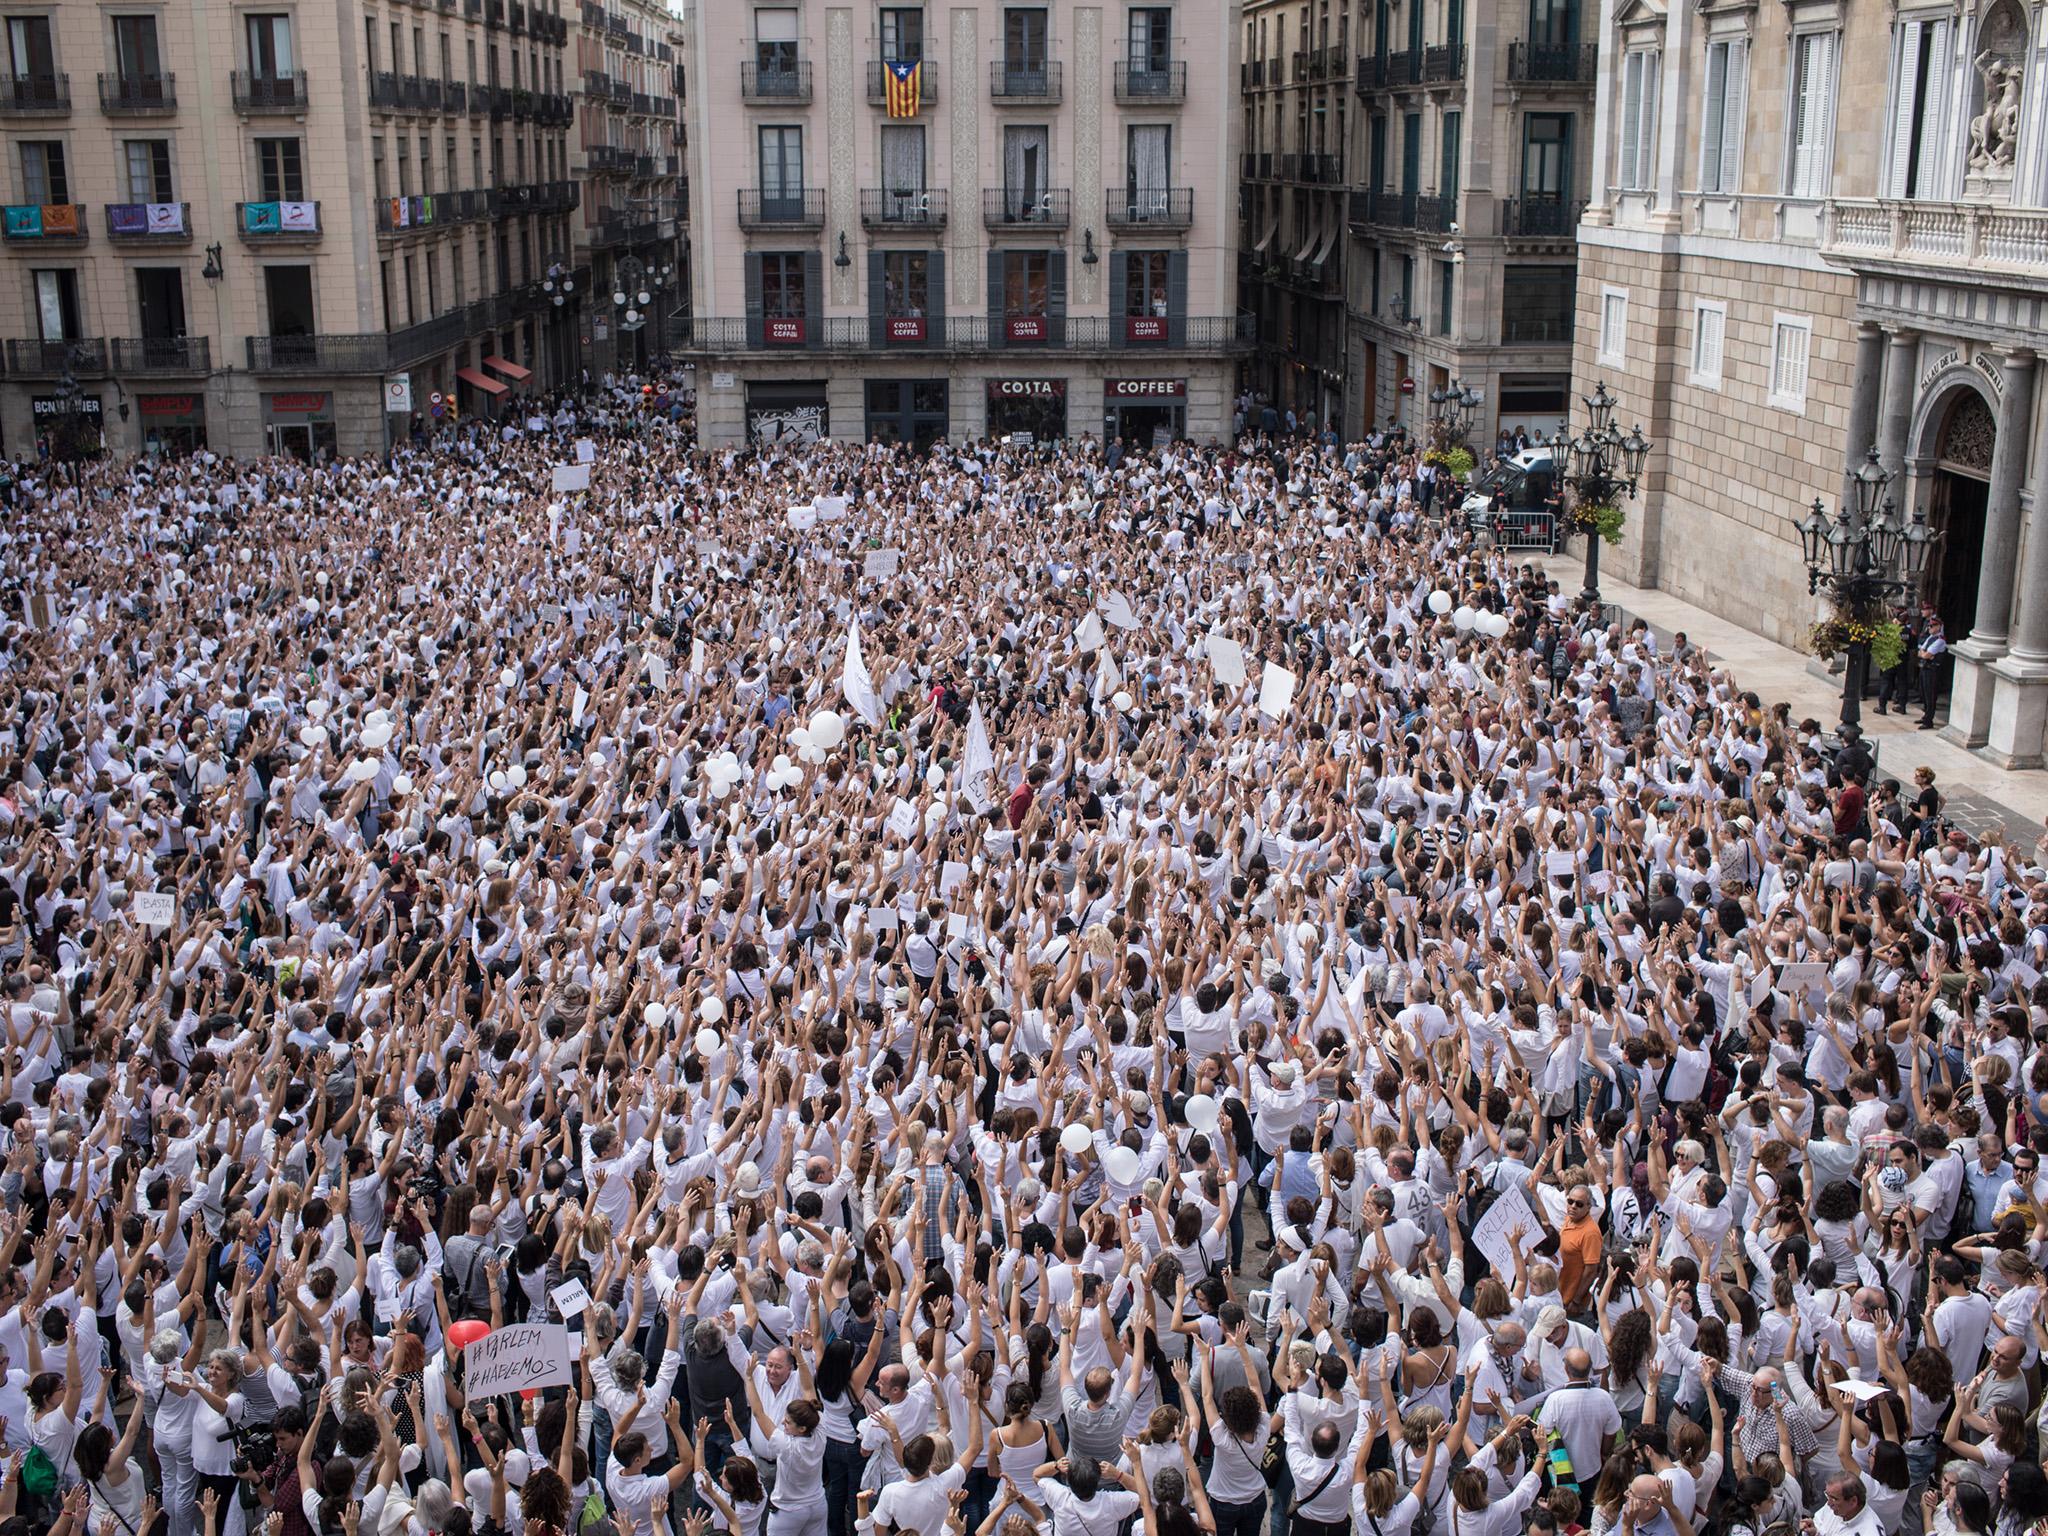 Thousands of people, dressed in white gather and chant the slogan “lets talk” outside the Barcelona city hall (Getty)